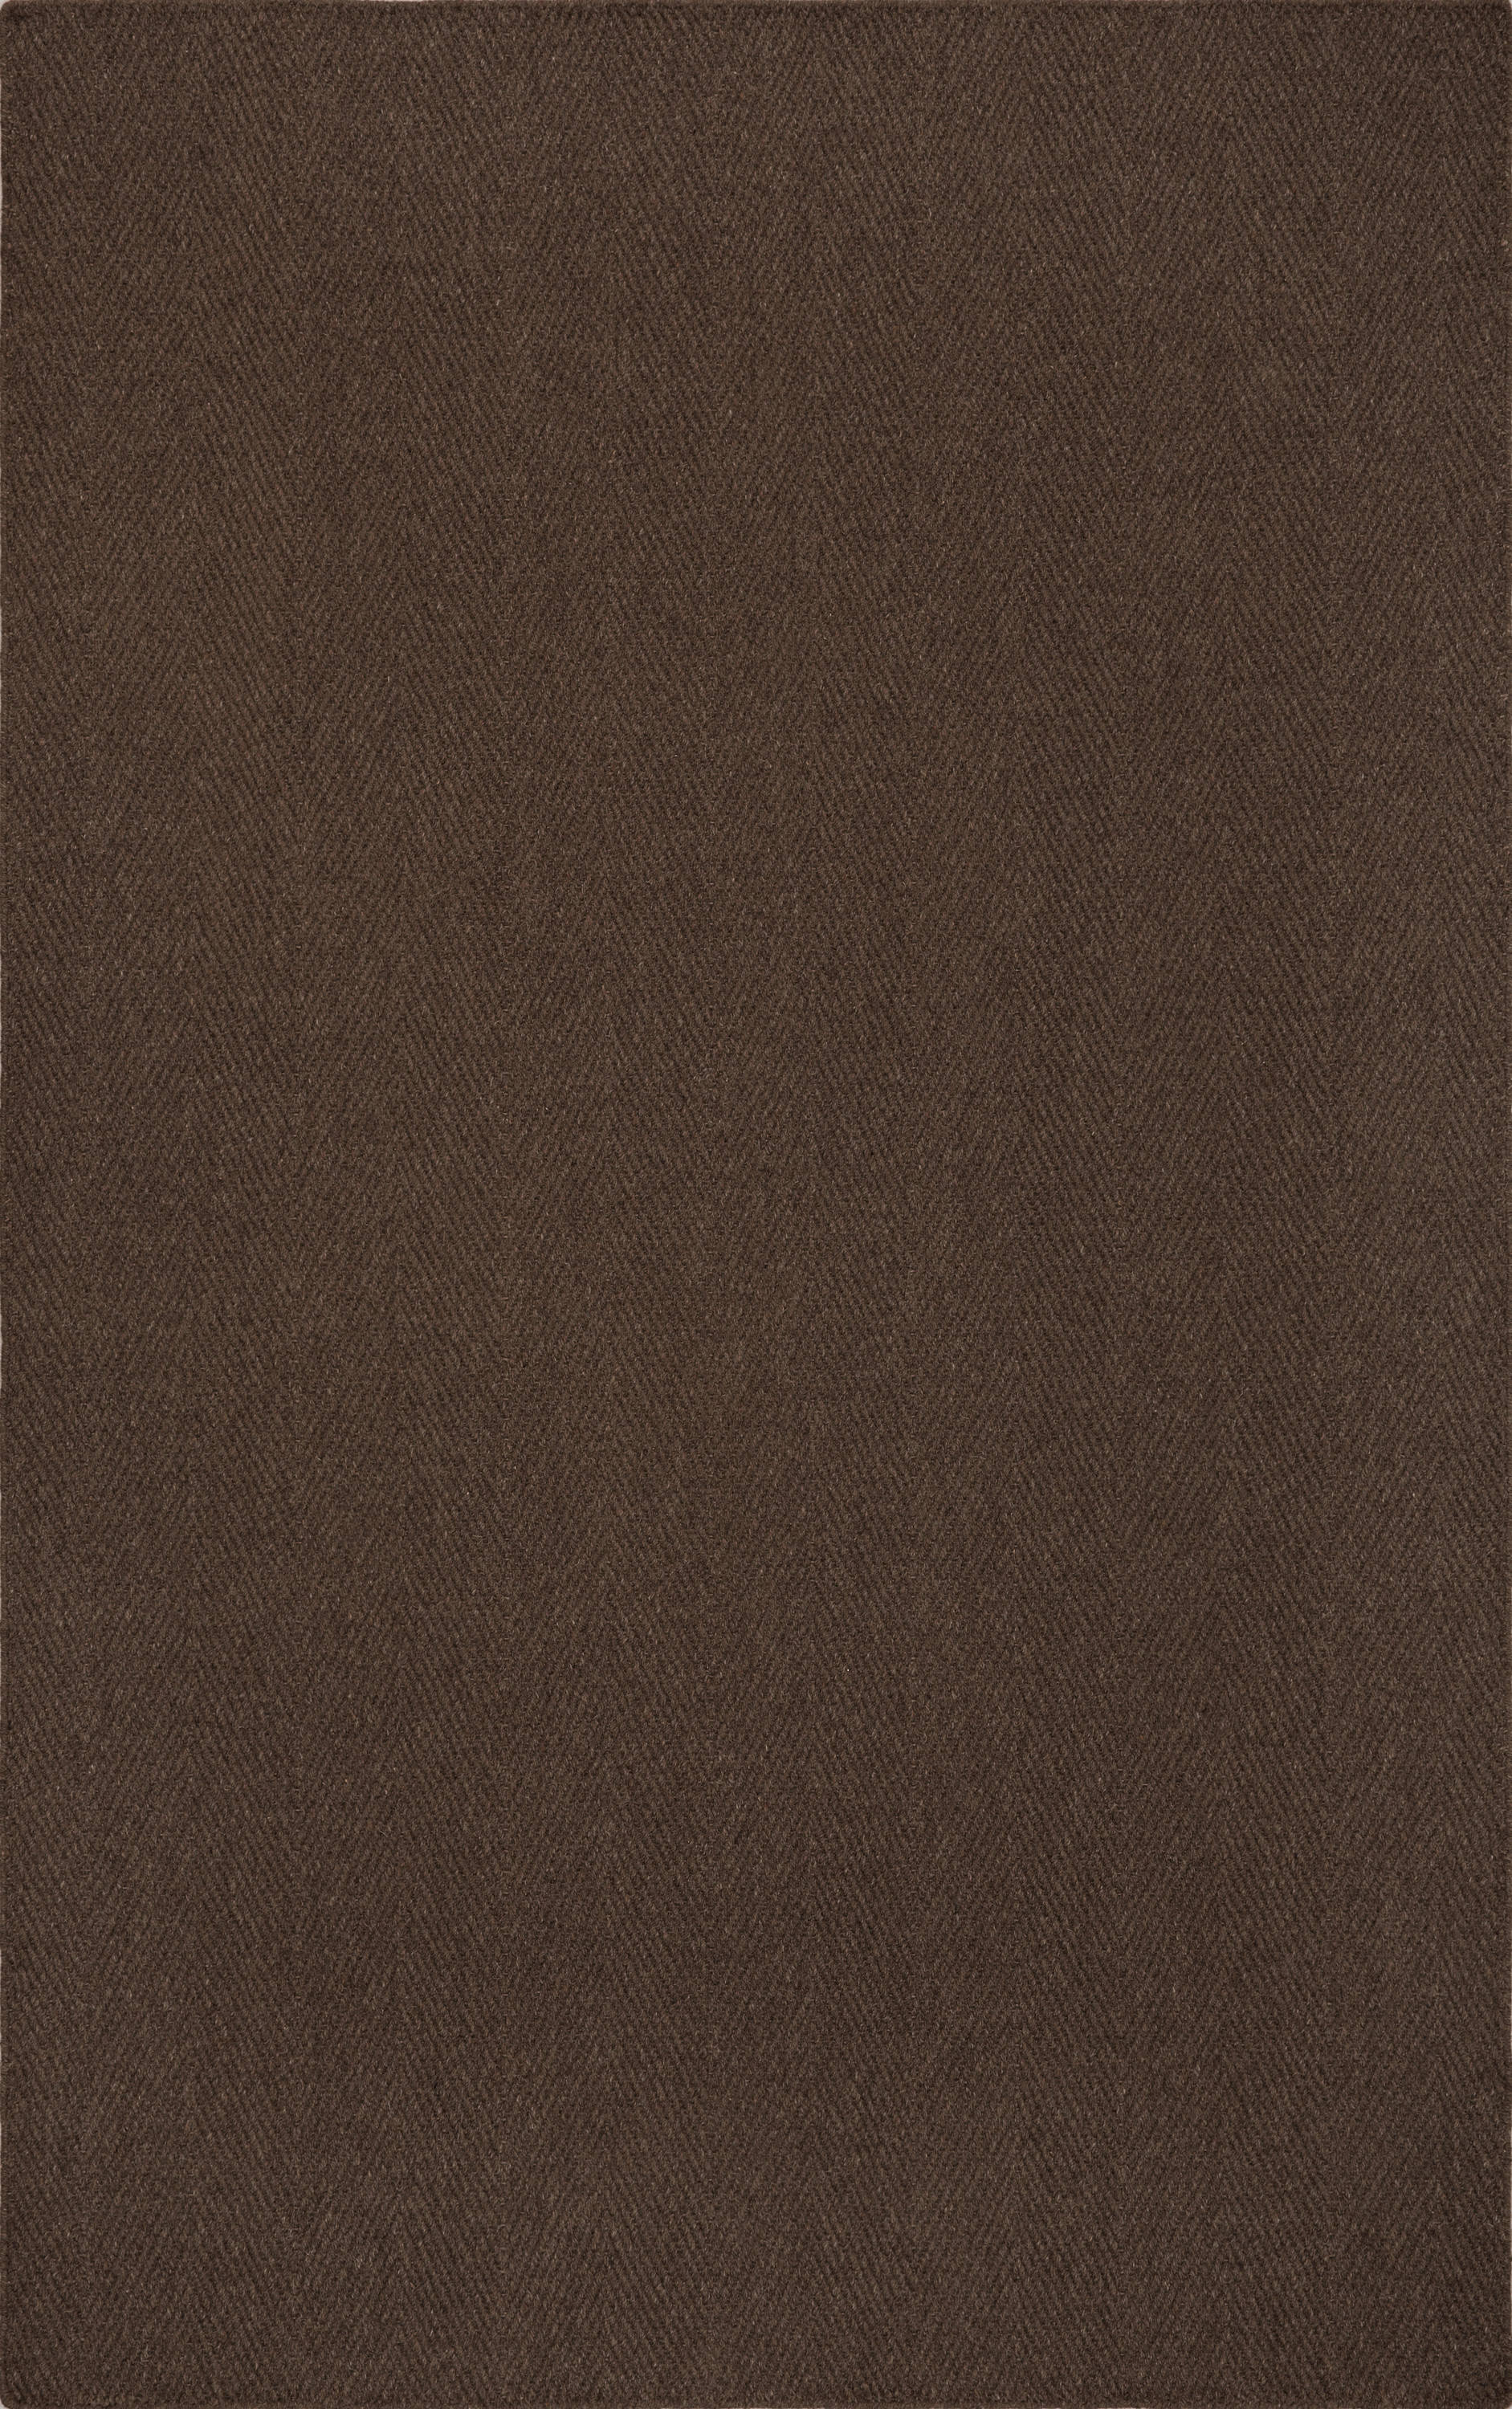 Addison Rugs Jaxon 4 X 6 (ft) Wool Brown Indoor Solid Farmhouse/Cottage ...